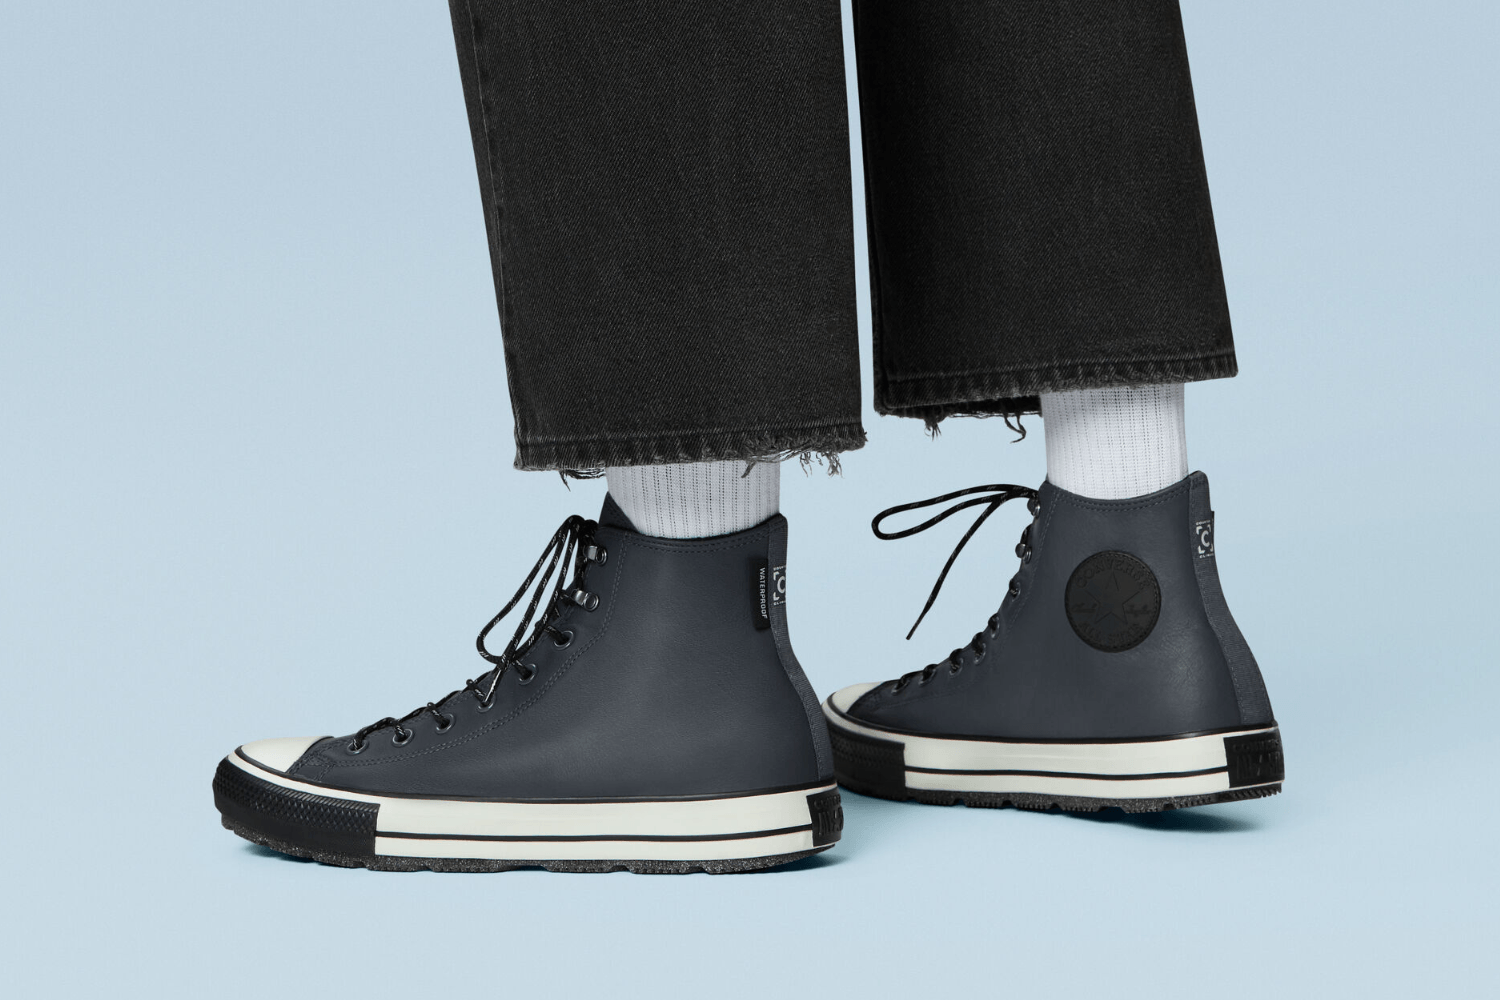 Get ready for every condition with the weatherised Chuck Taylor Converse collection